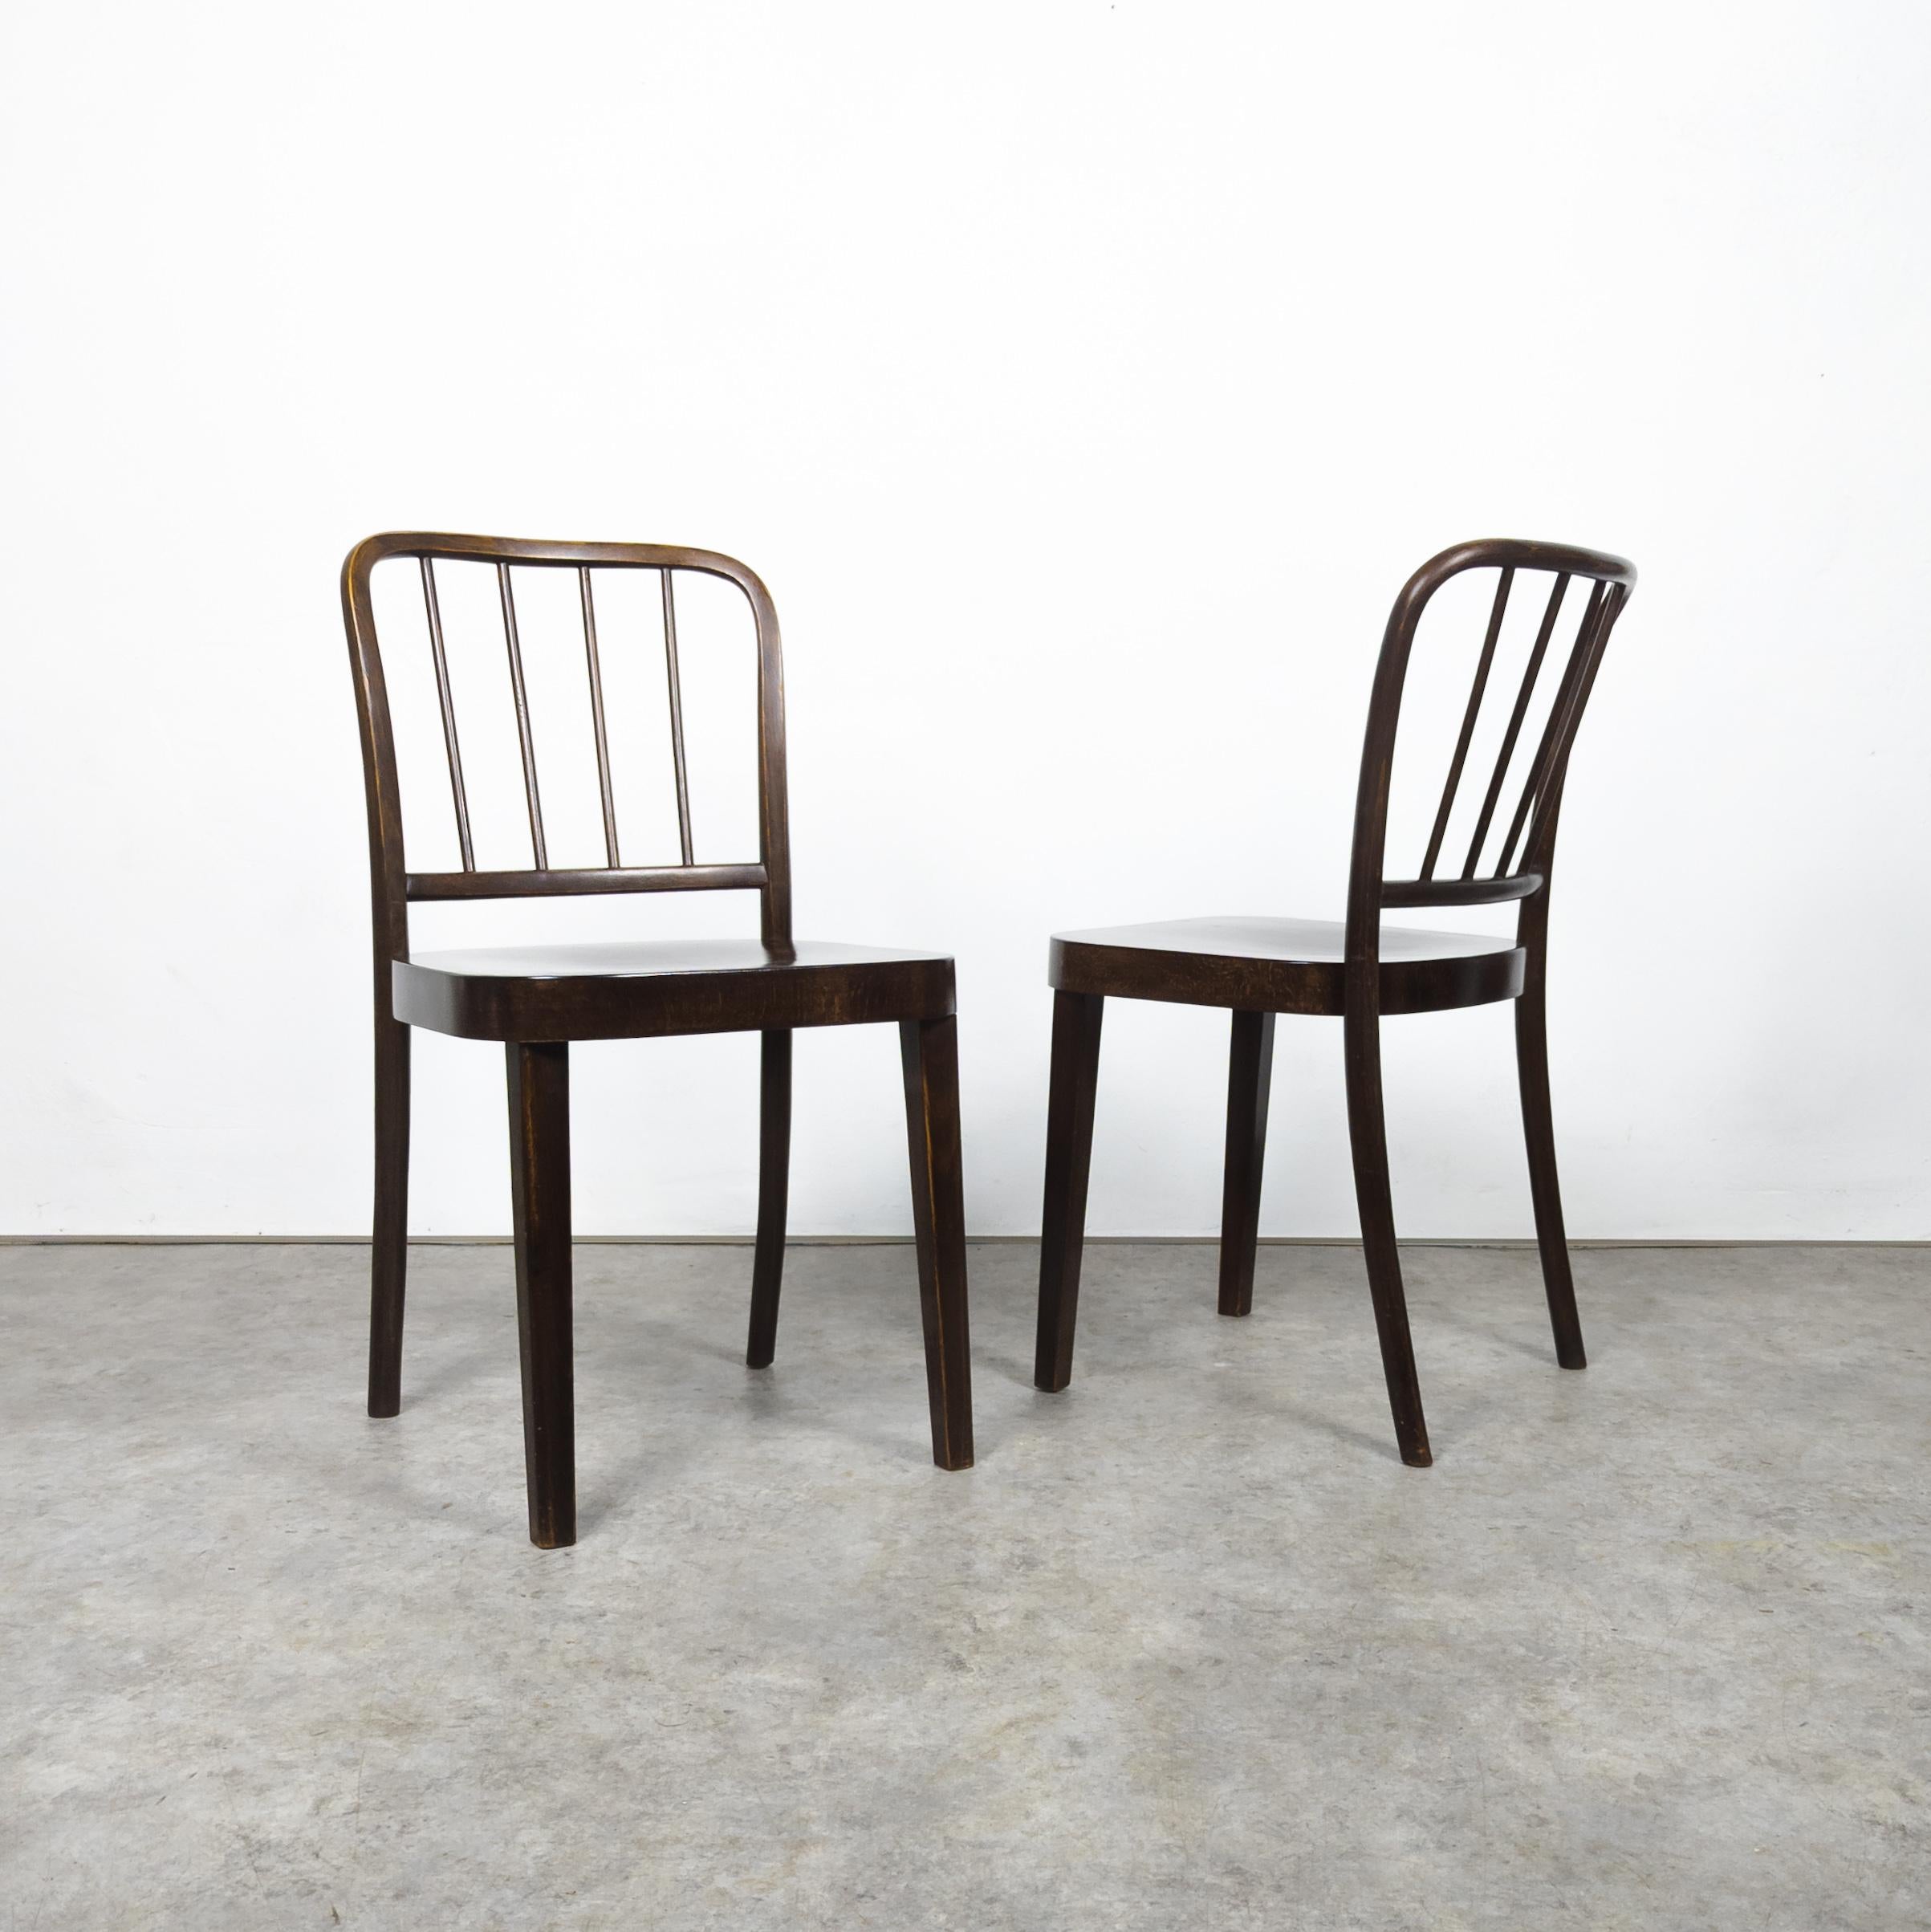 Rare set of four Thonet A 811/4 chairs by Josef Hoffmann For Sale 3